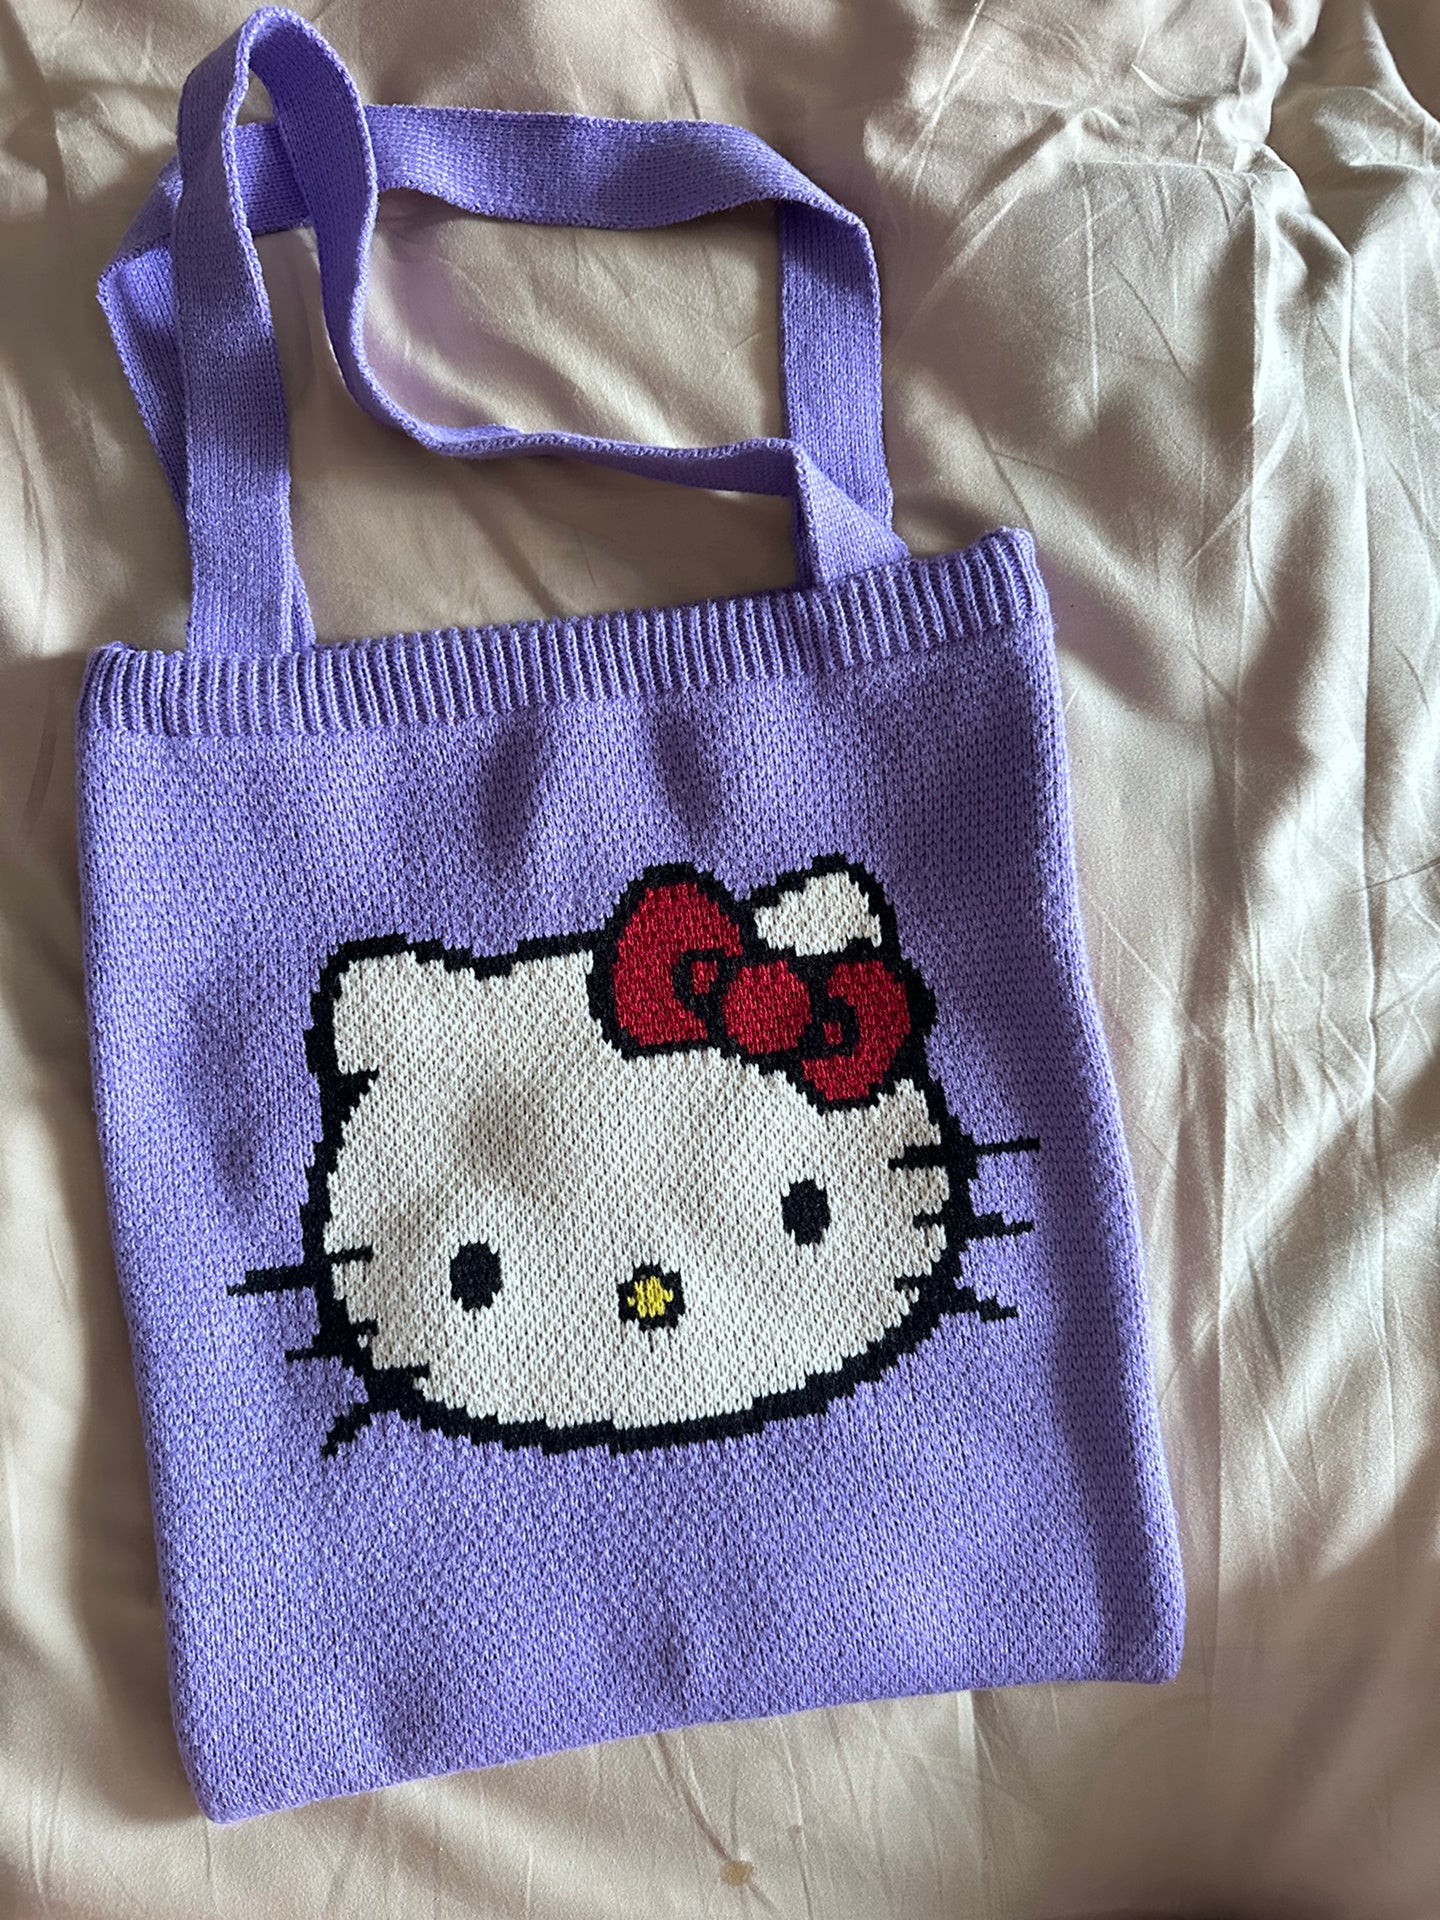 Jisoo Hello Kitty tote bag💓 11by14” requested by my client